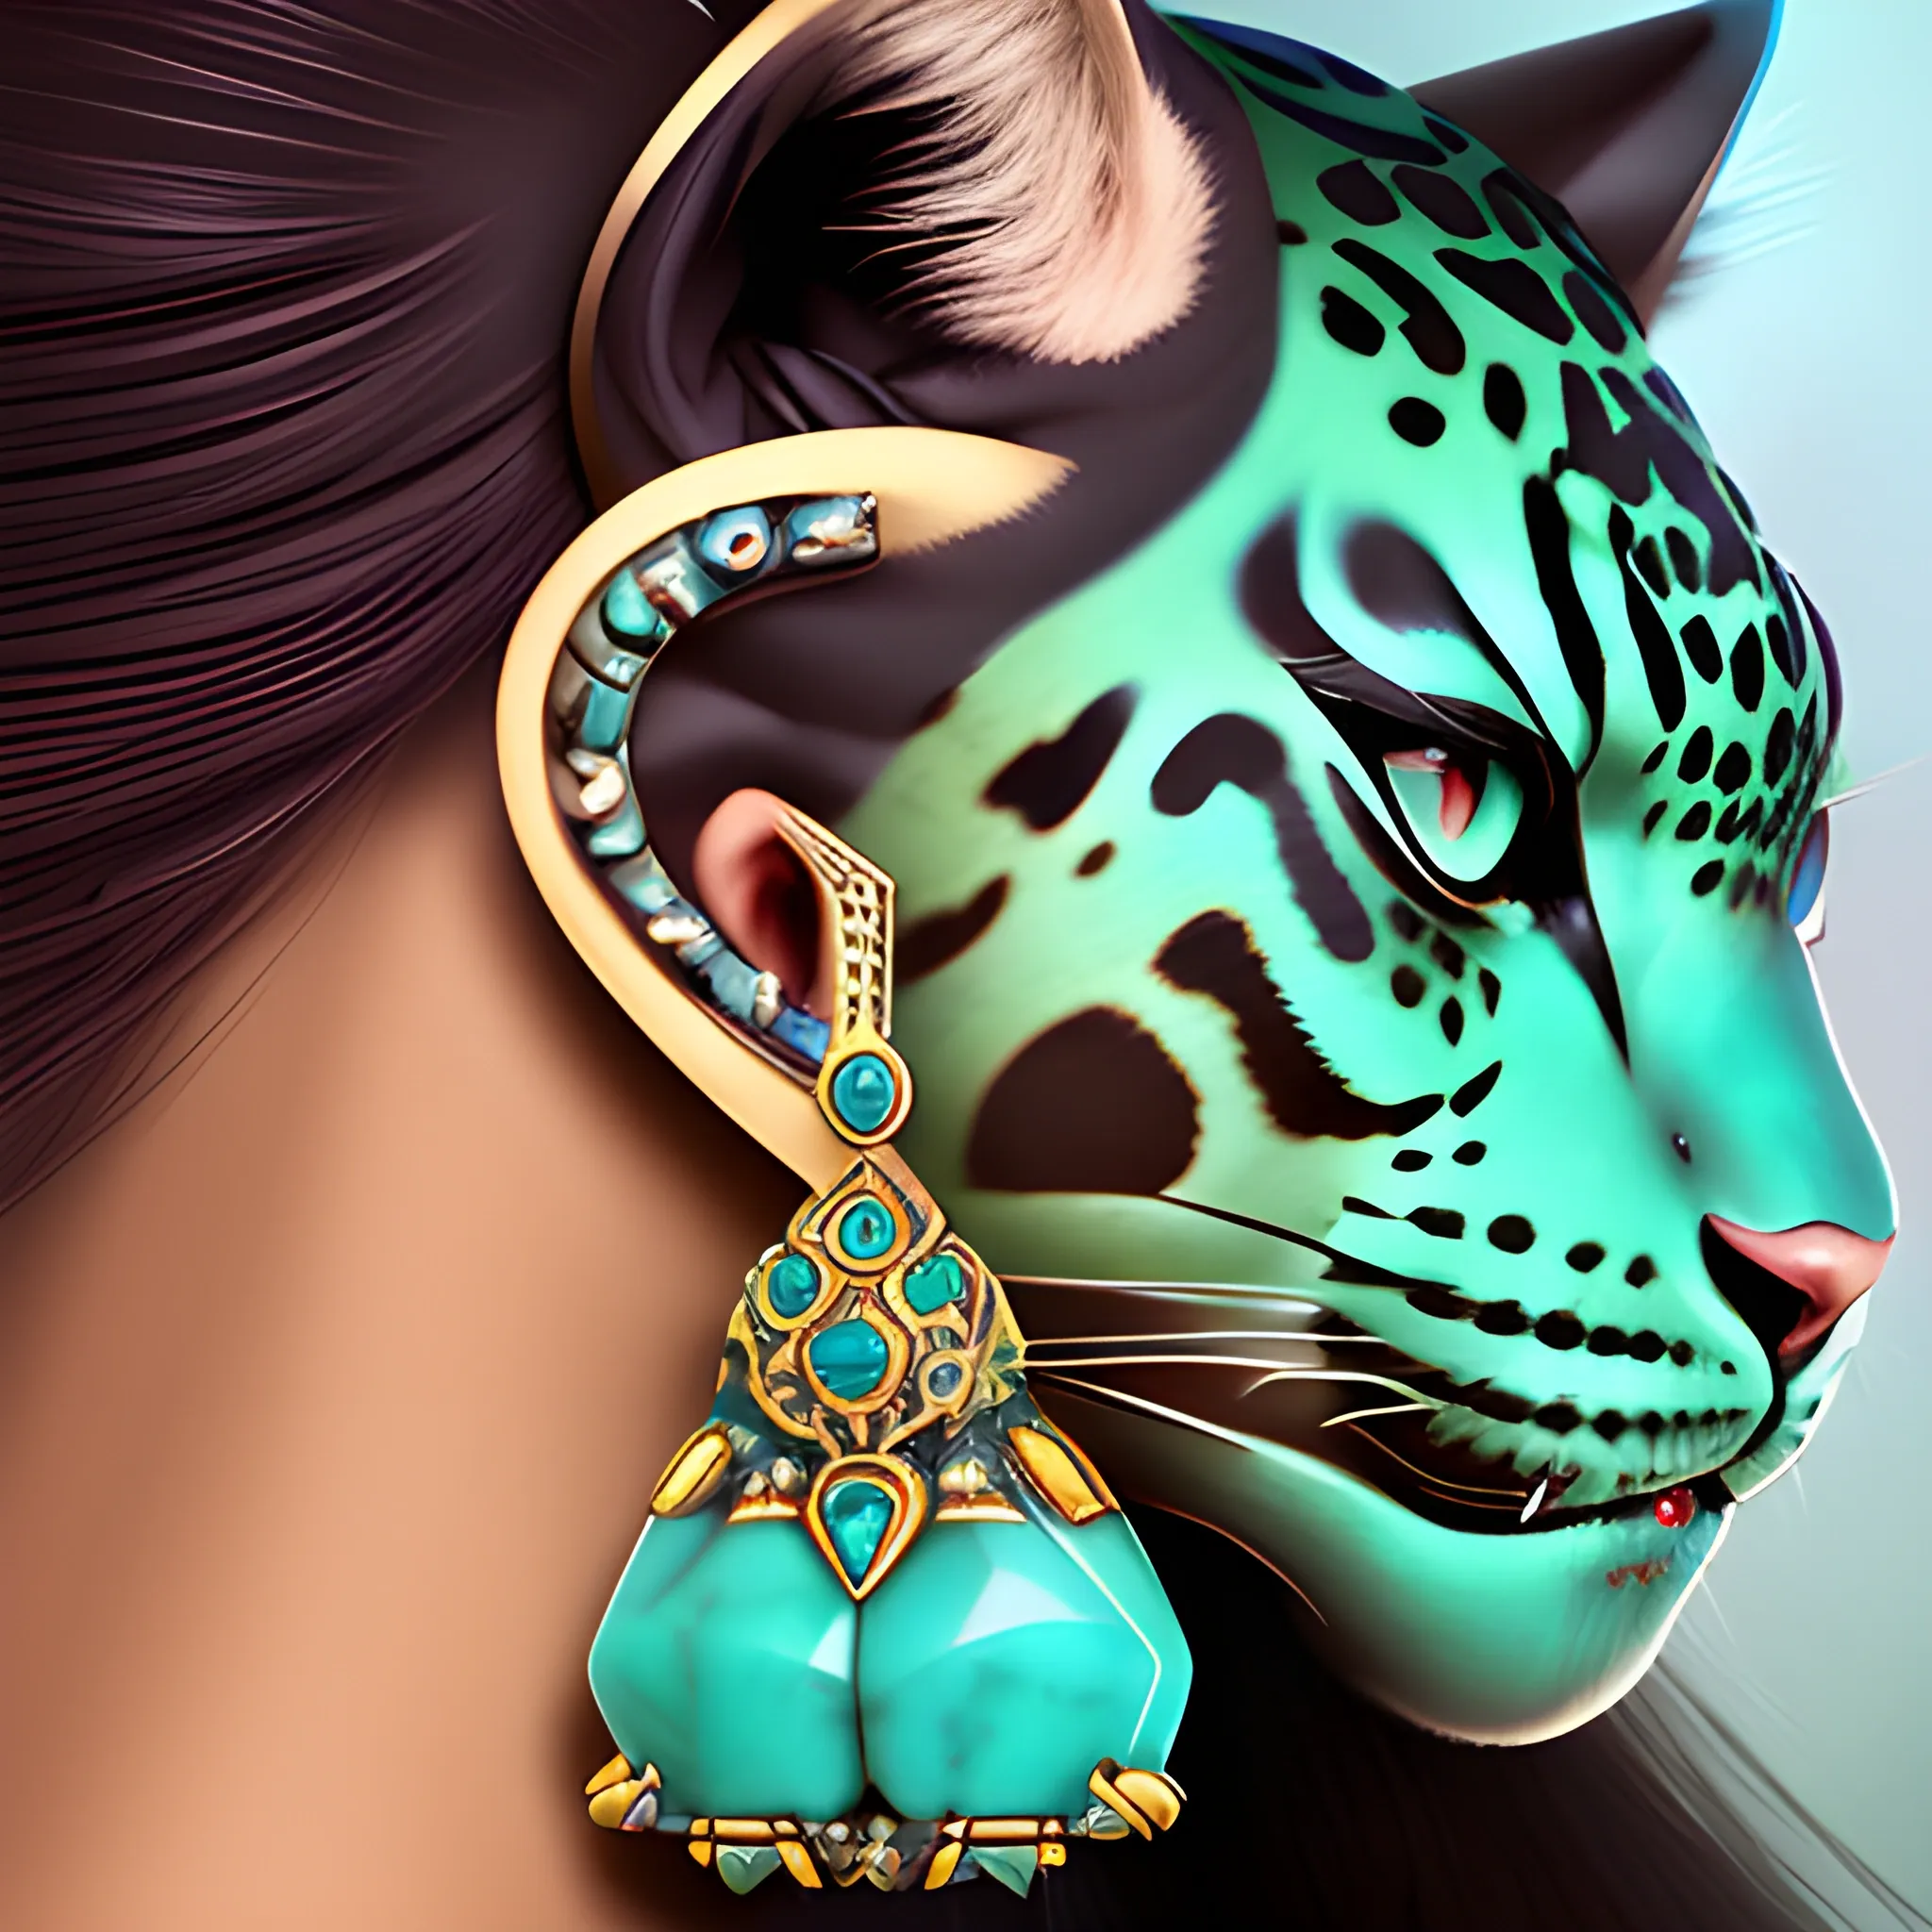 photorealistic dnd jaguar anthropomorphic female dungeons and dragons jaguar tabaxi female pierced ears turquoise jewelry, jade accessories, elegant ornate